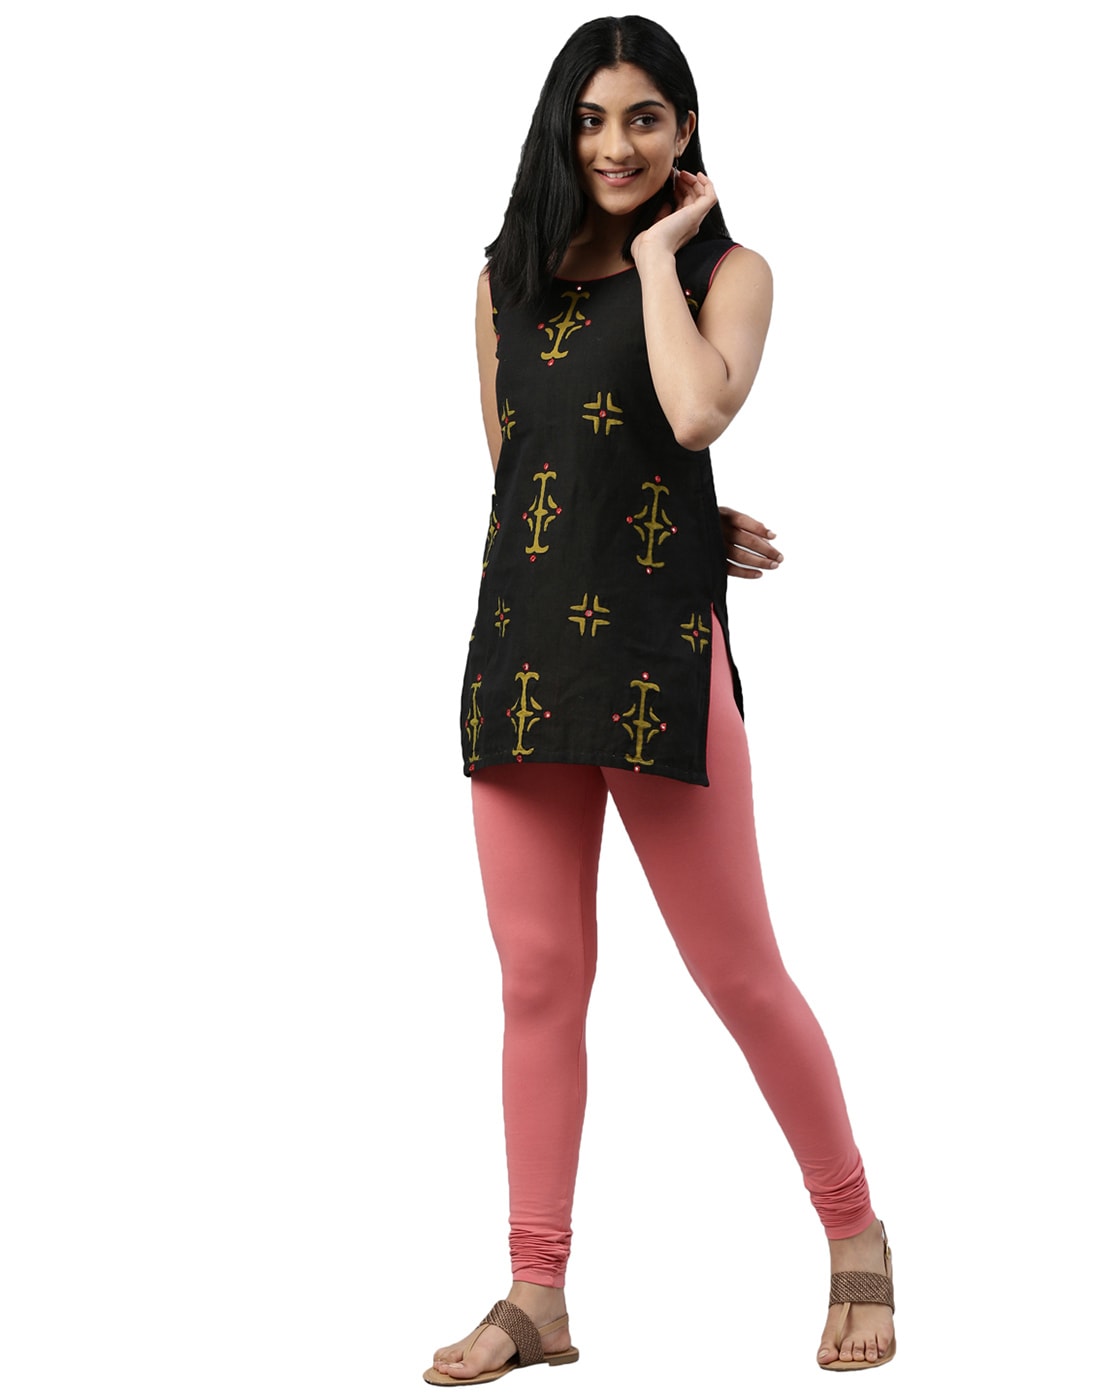 Indian Women Red High Quality Leggings Solid Churidar Free Size